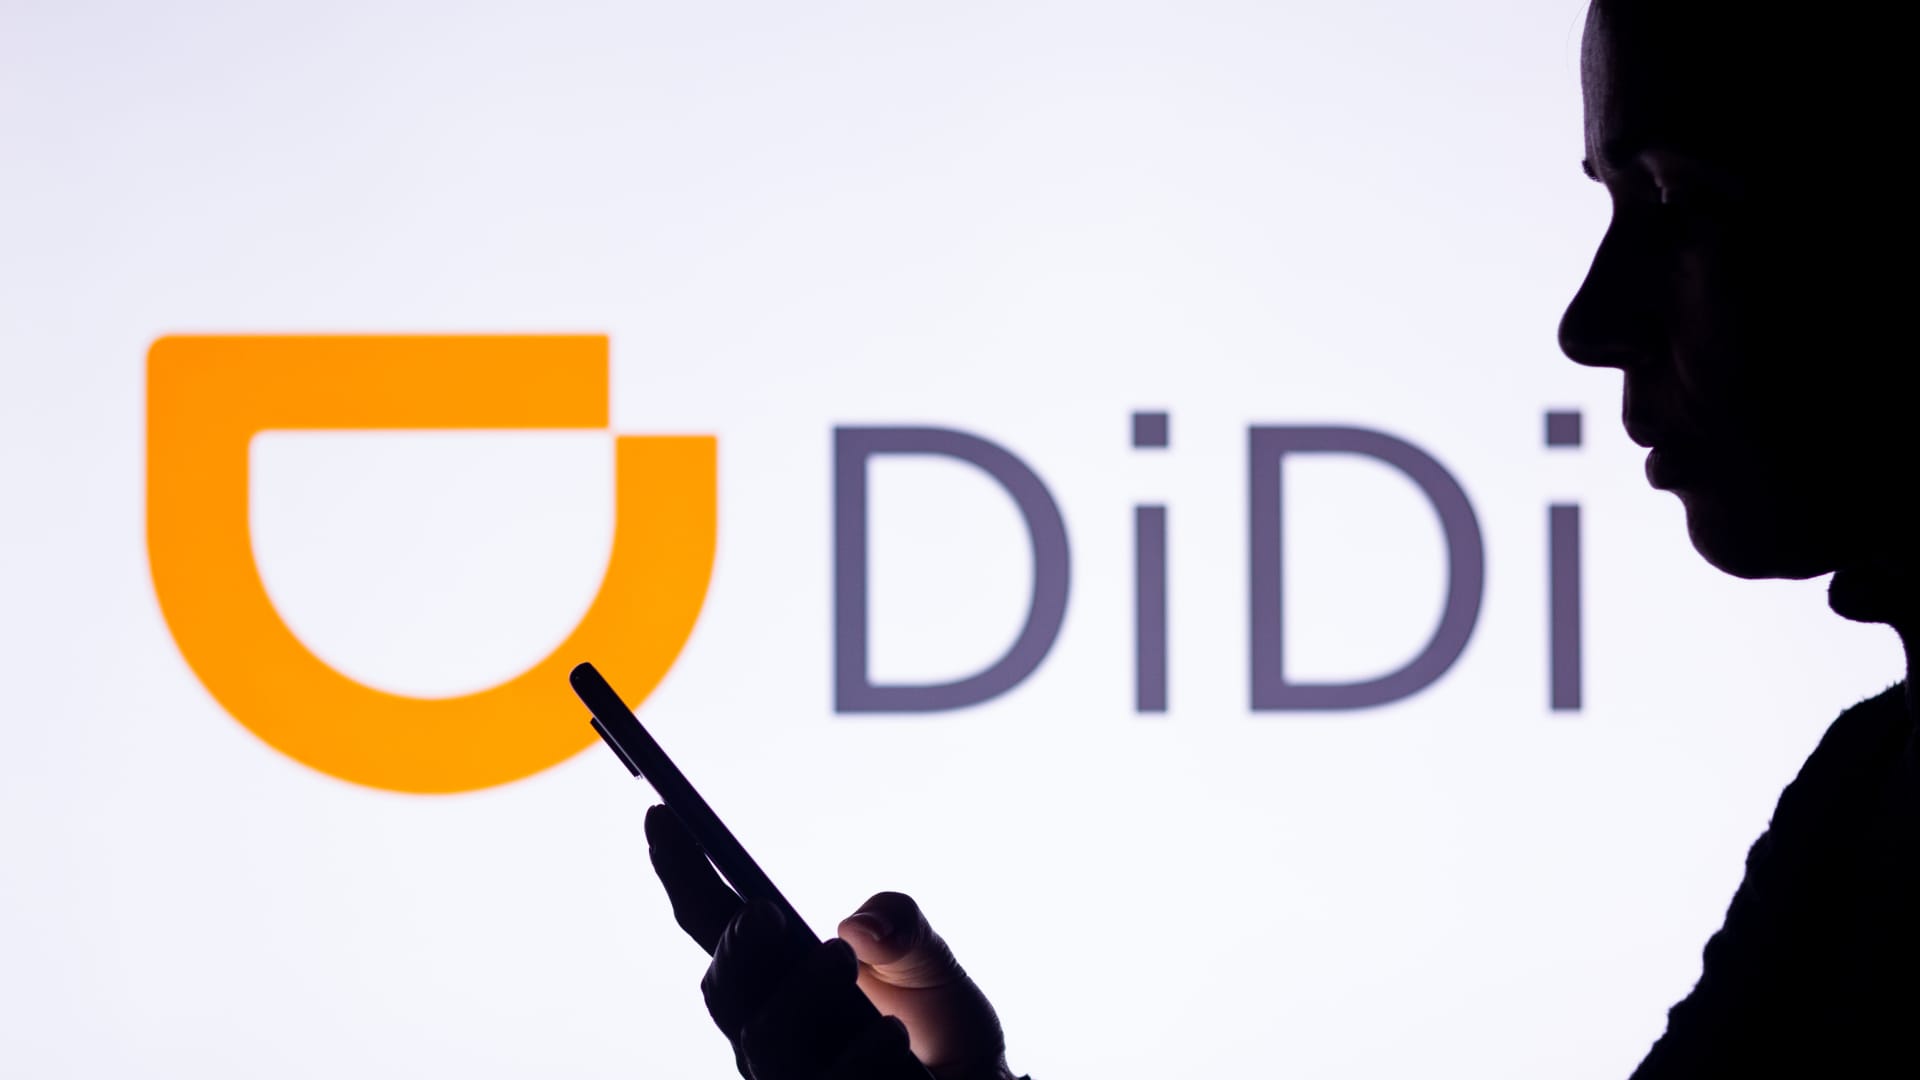 Chinese ride-hailing giant Didi investigated by SEC after U.S. IPO